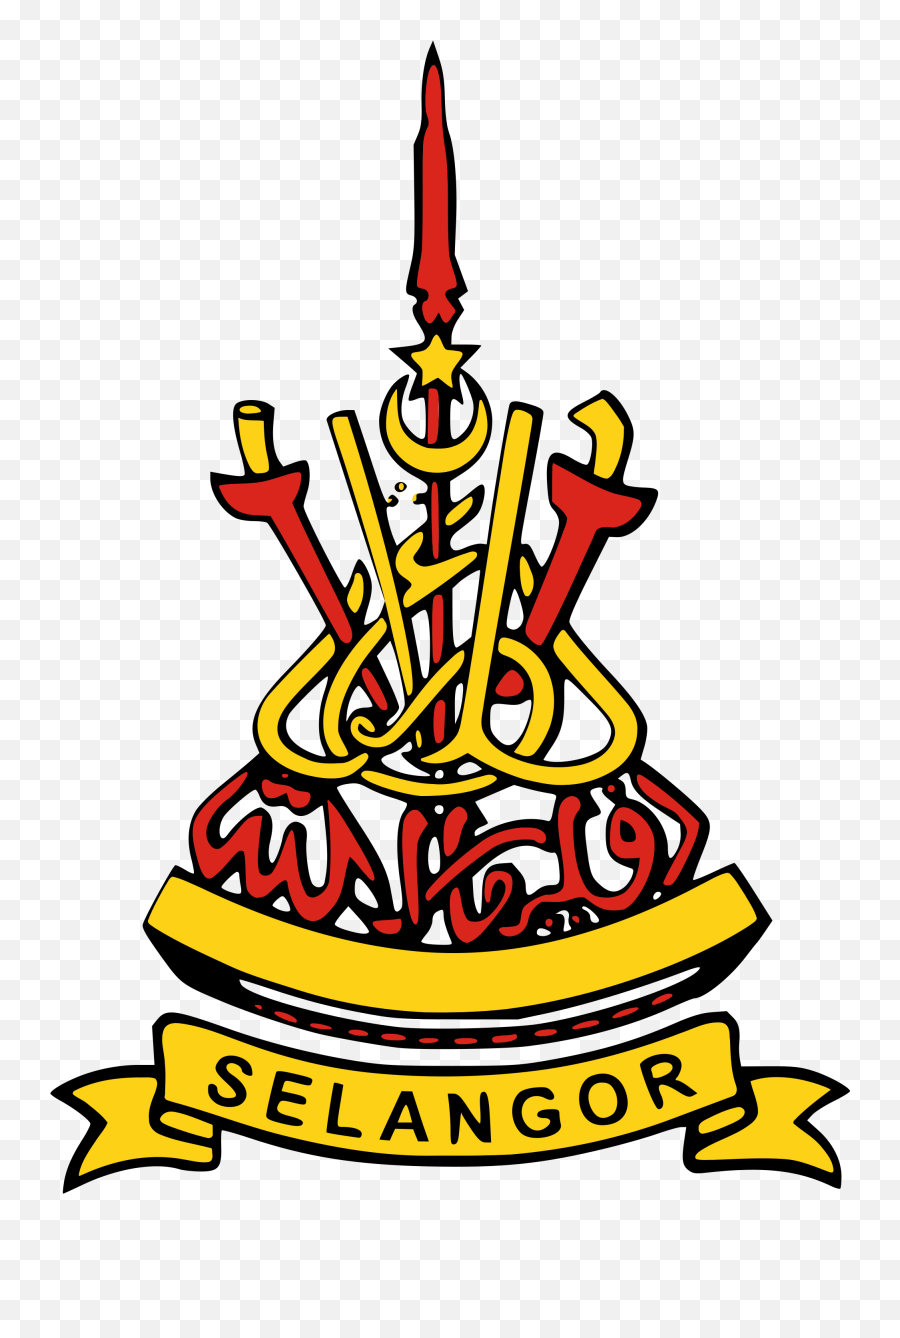 Flag Clipart Selangor - Selangor State Government Png Selangor Coat Of Arms Emoji,Mexican Flag Clipart